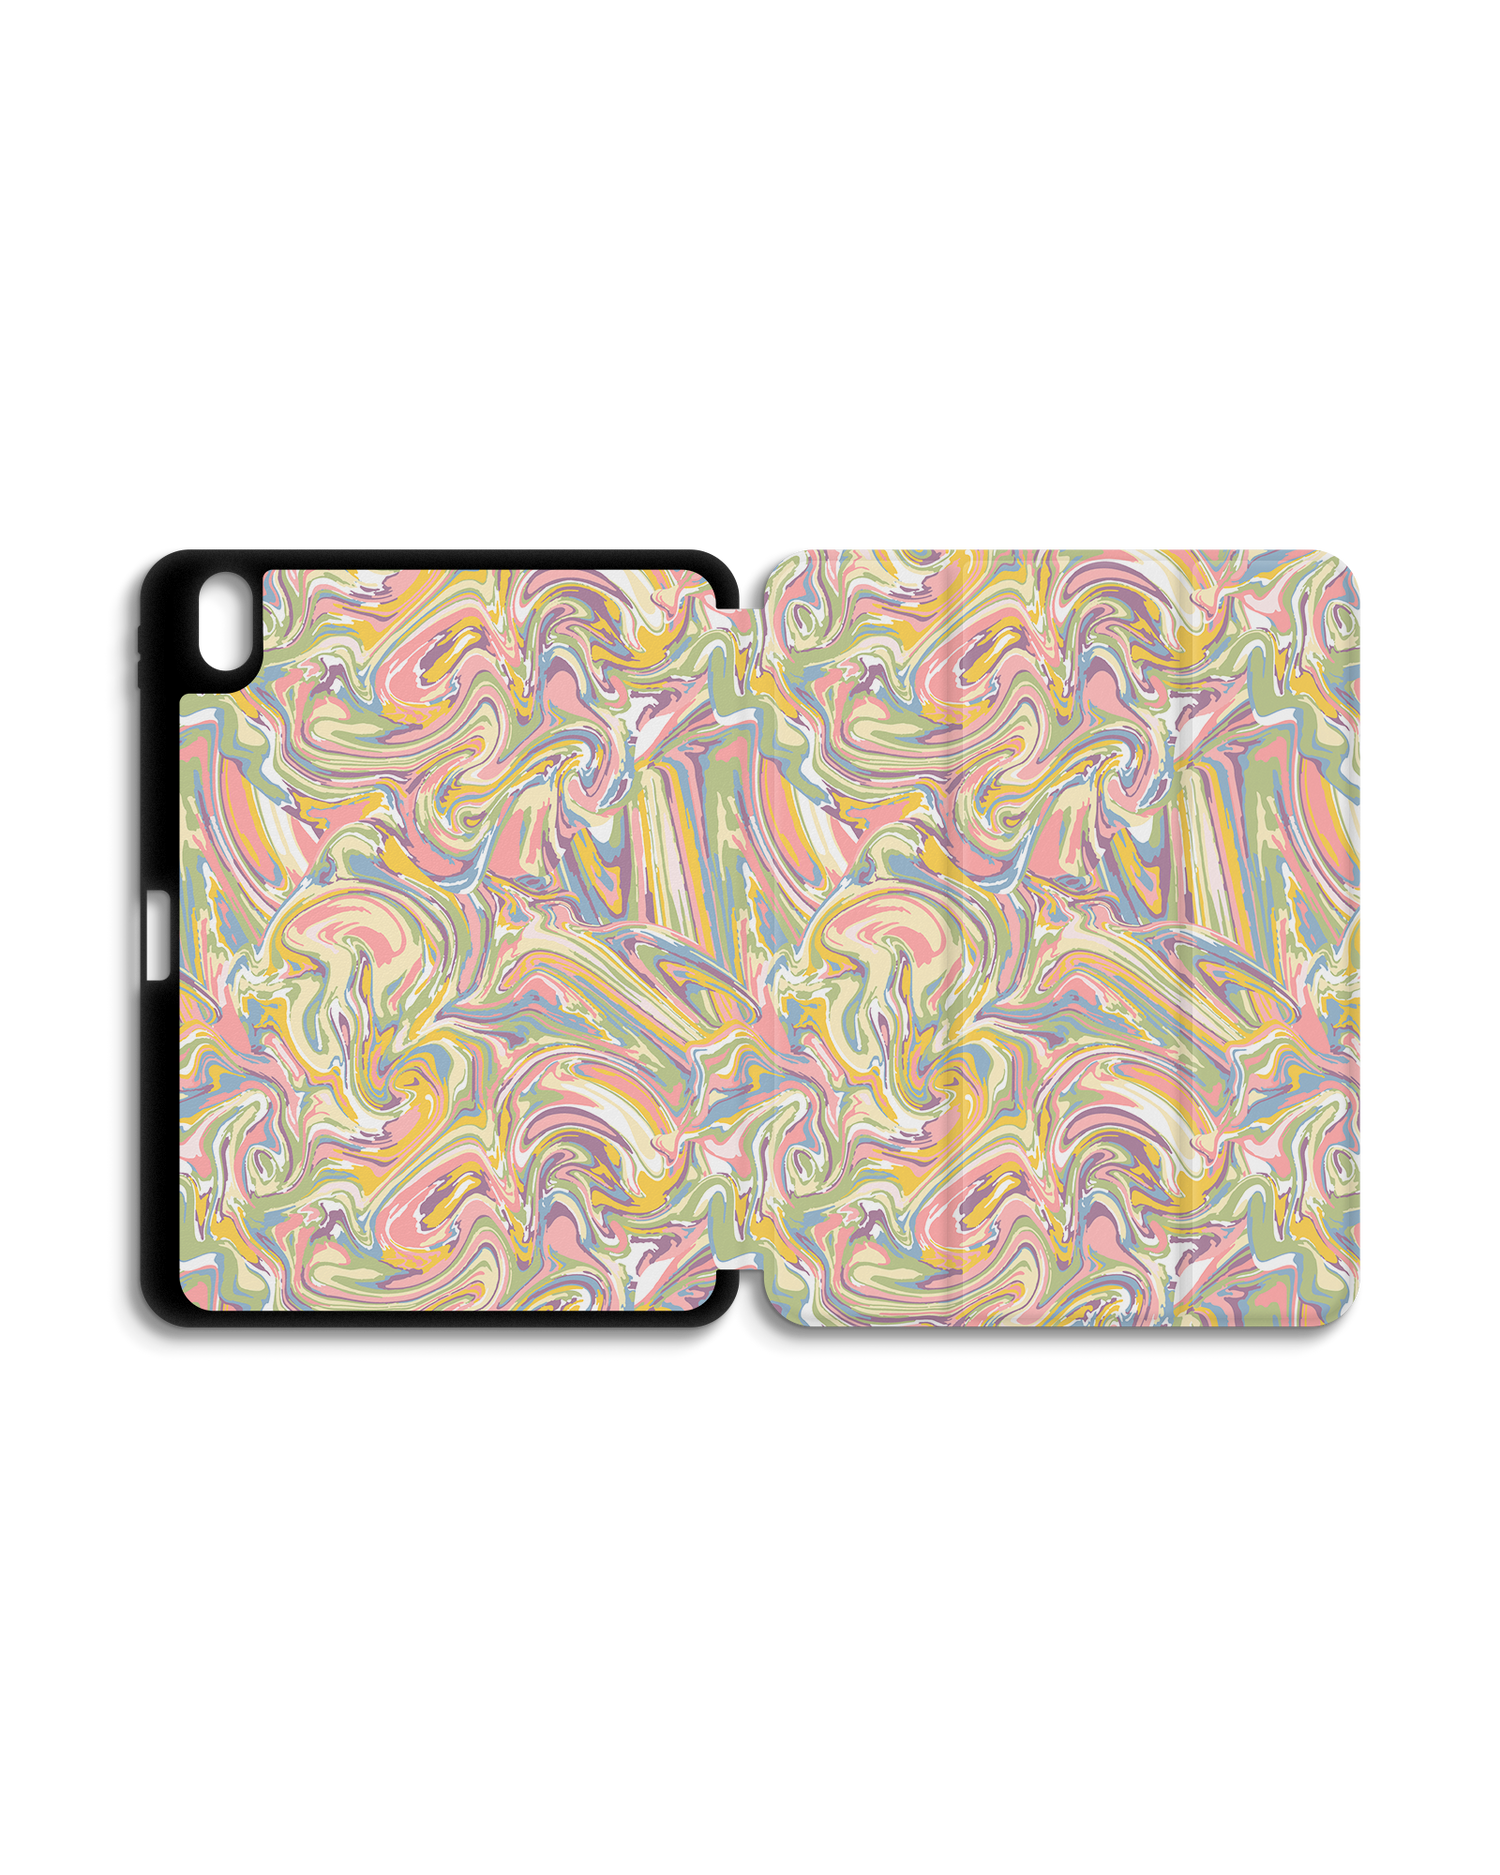 Psychedelic Optics iPad Case with Pencil Holder for Apple iPad (10th Generation): Opened exterior view